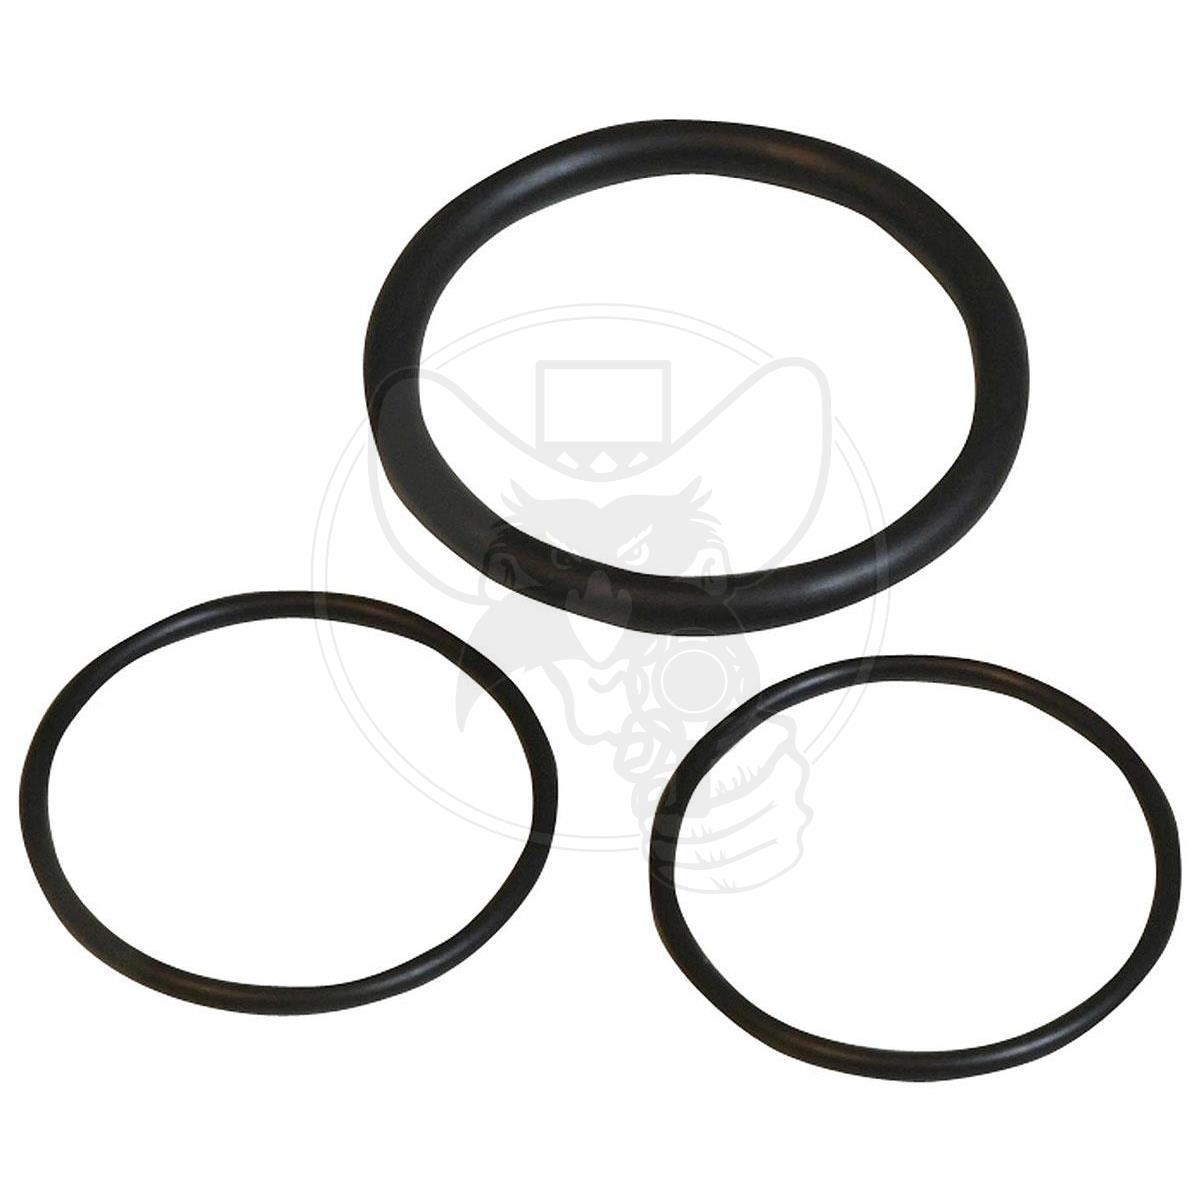 MSD DISTRIBUTOR GASKET FITS CHEVY